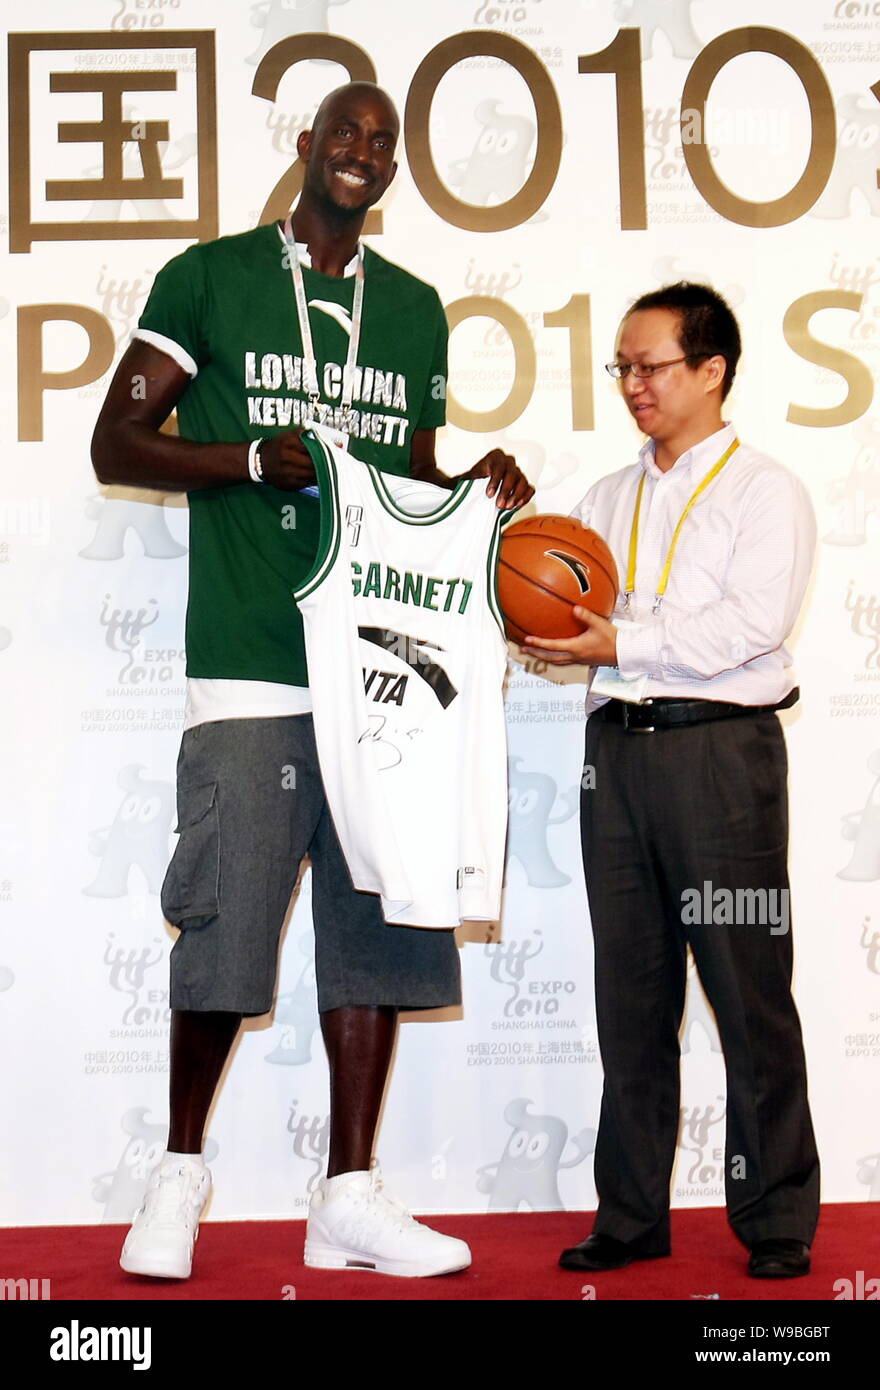 NBA basektball player Kevin Garnett of the Boston Celtics (left) shows a jersey and a basketball with his signature at a meeting with Chinese basketba Stock Photo